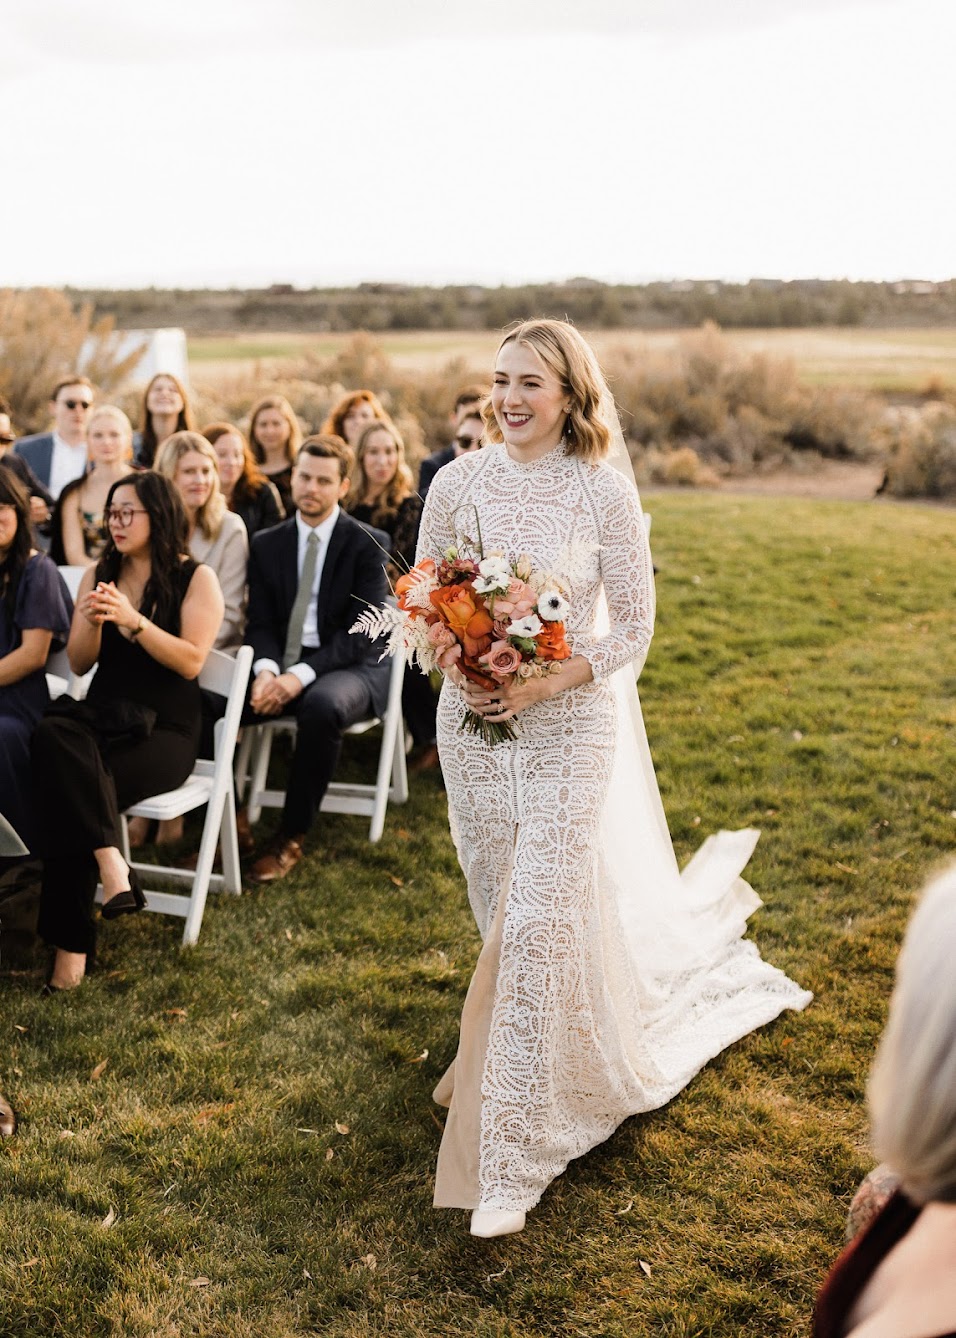 The bride is walking down the grassy aisle alone with her bouquet in her hand smiling. 